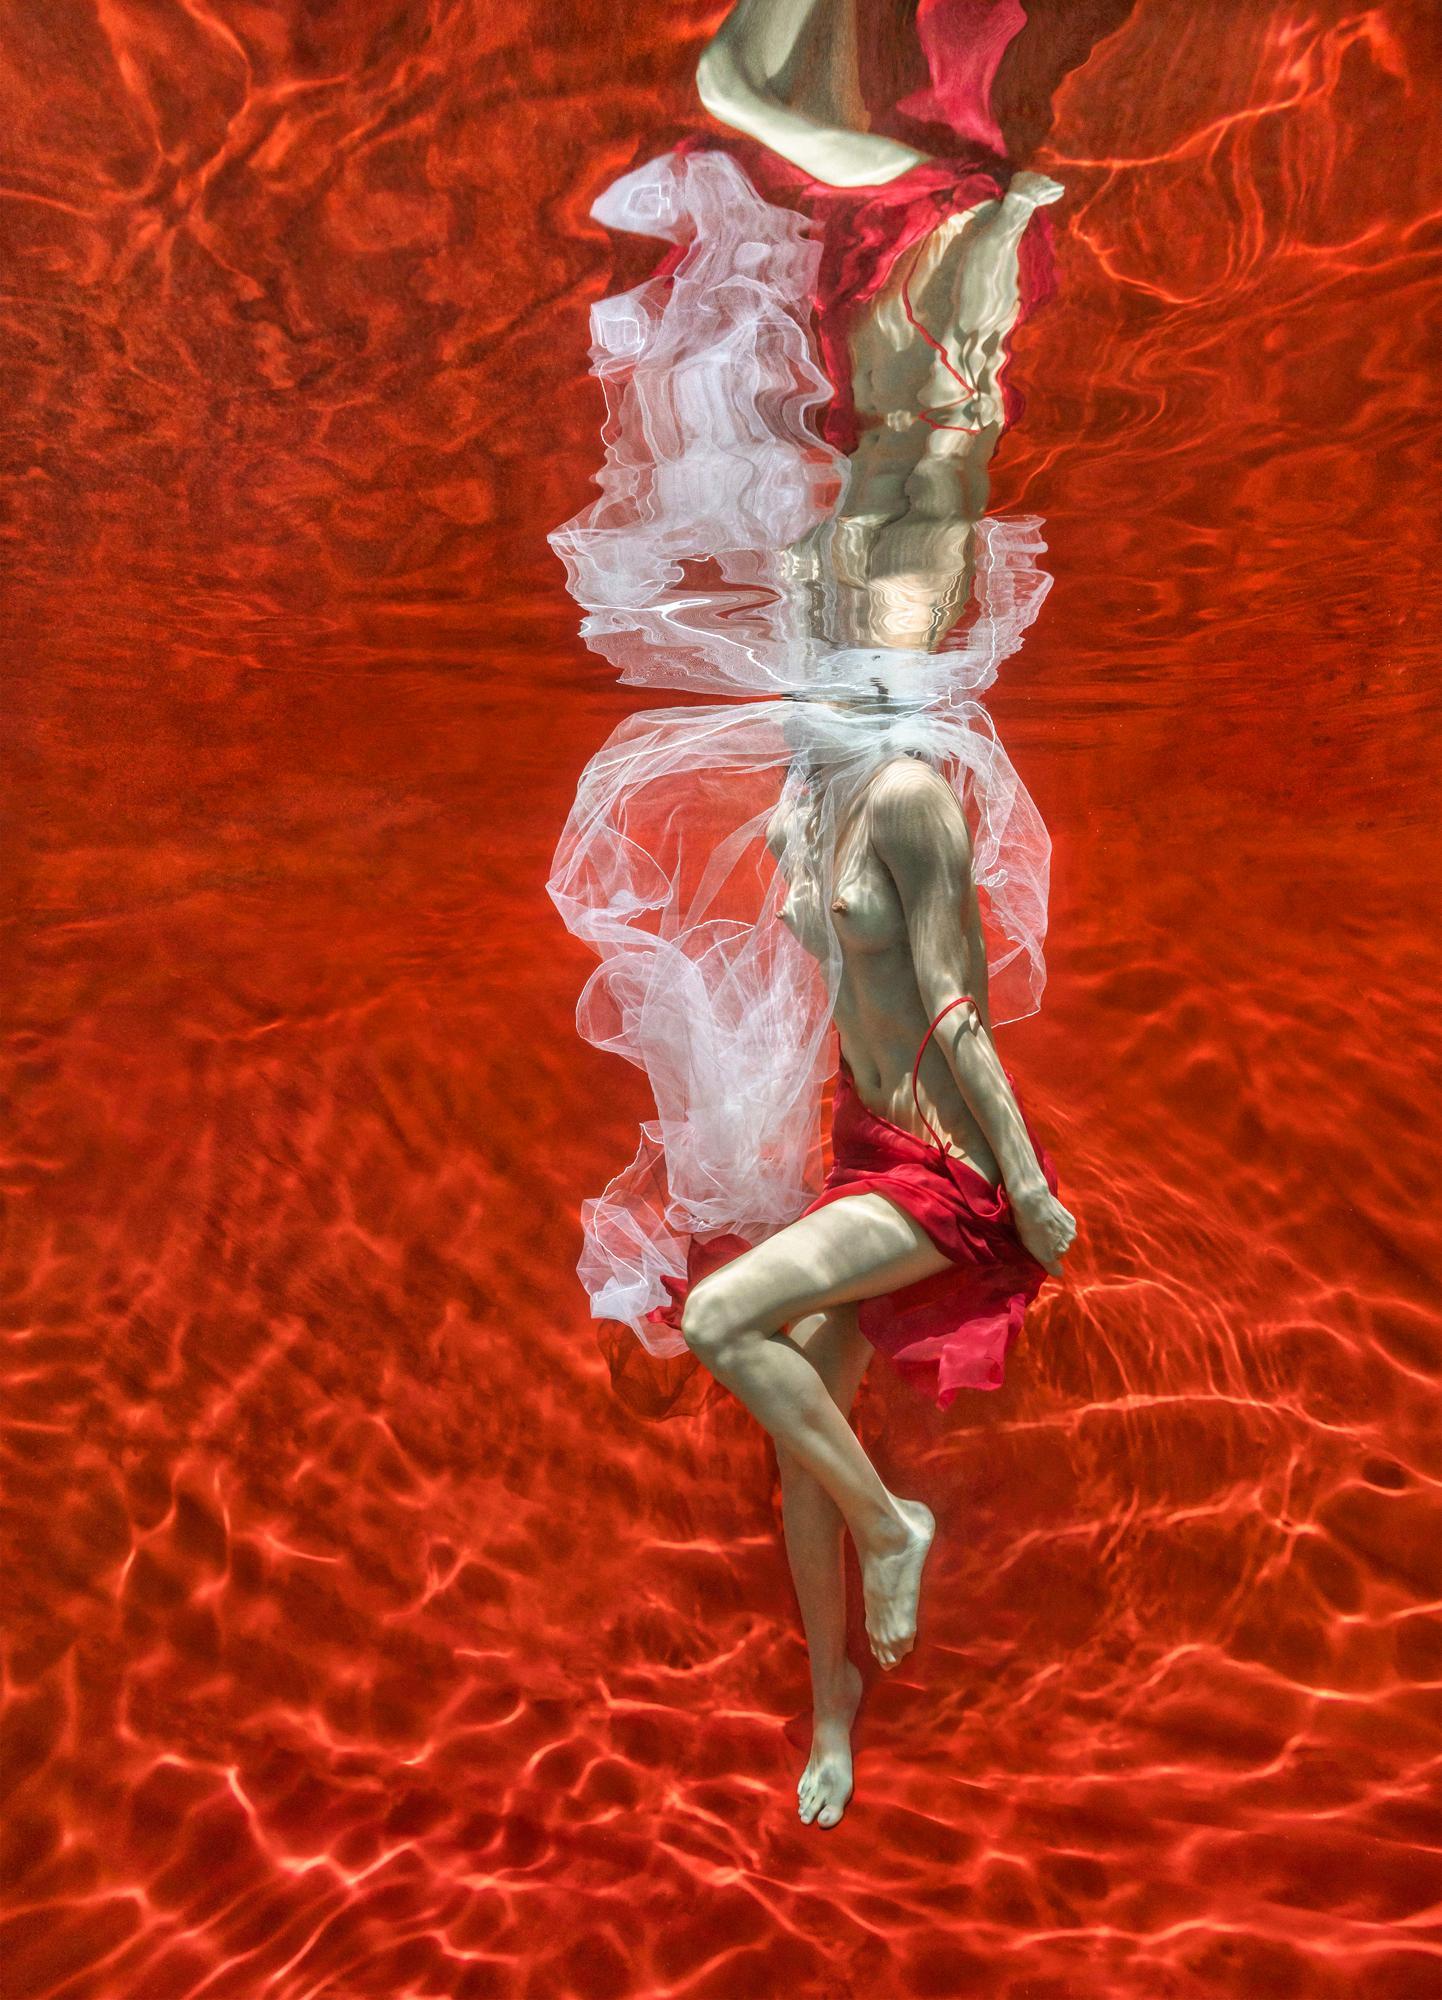 Alex Sher Color Photograph - Blood and Milk III   - underwater nude photograph - print on aluminum 36x24"